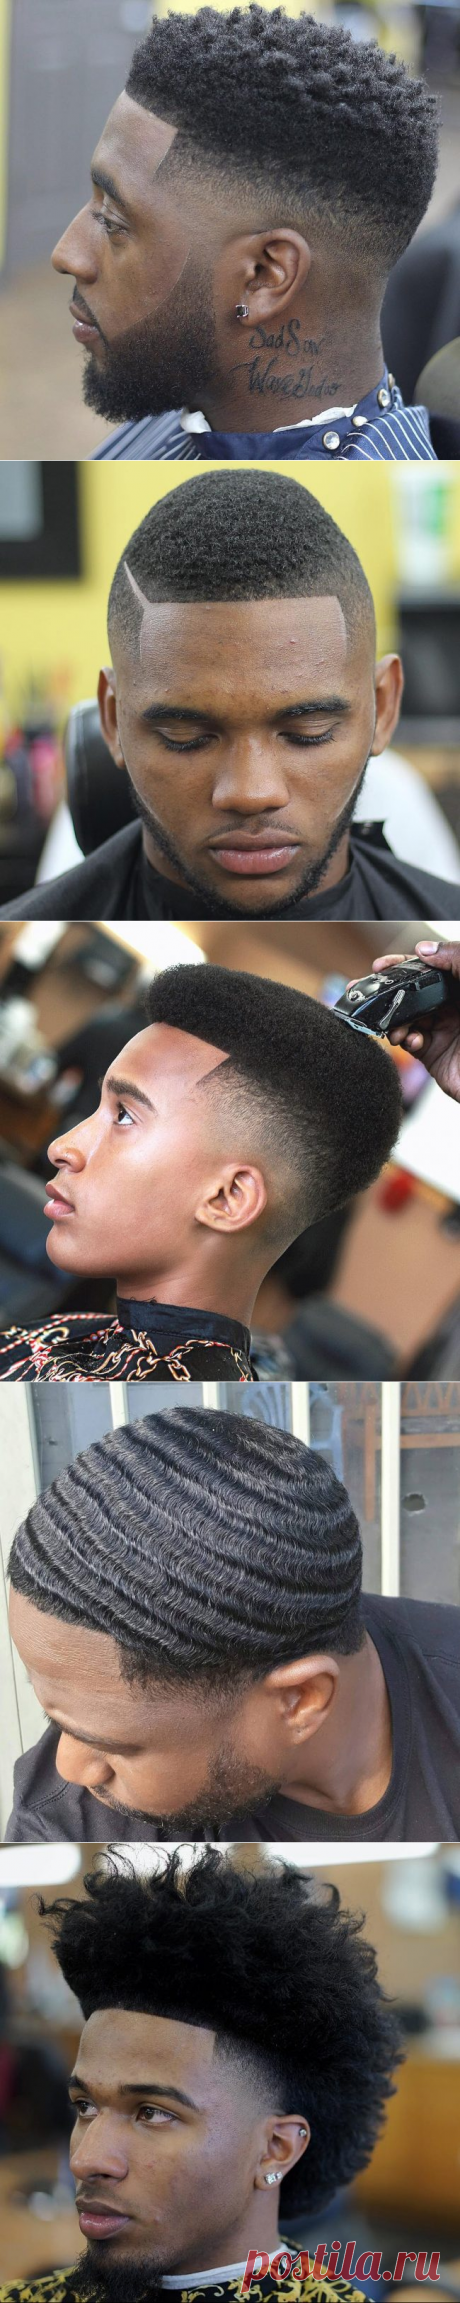 55 Trendy Hairstyles for Black Men - New Styling Ideas